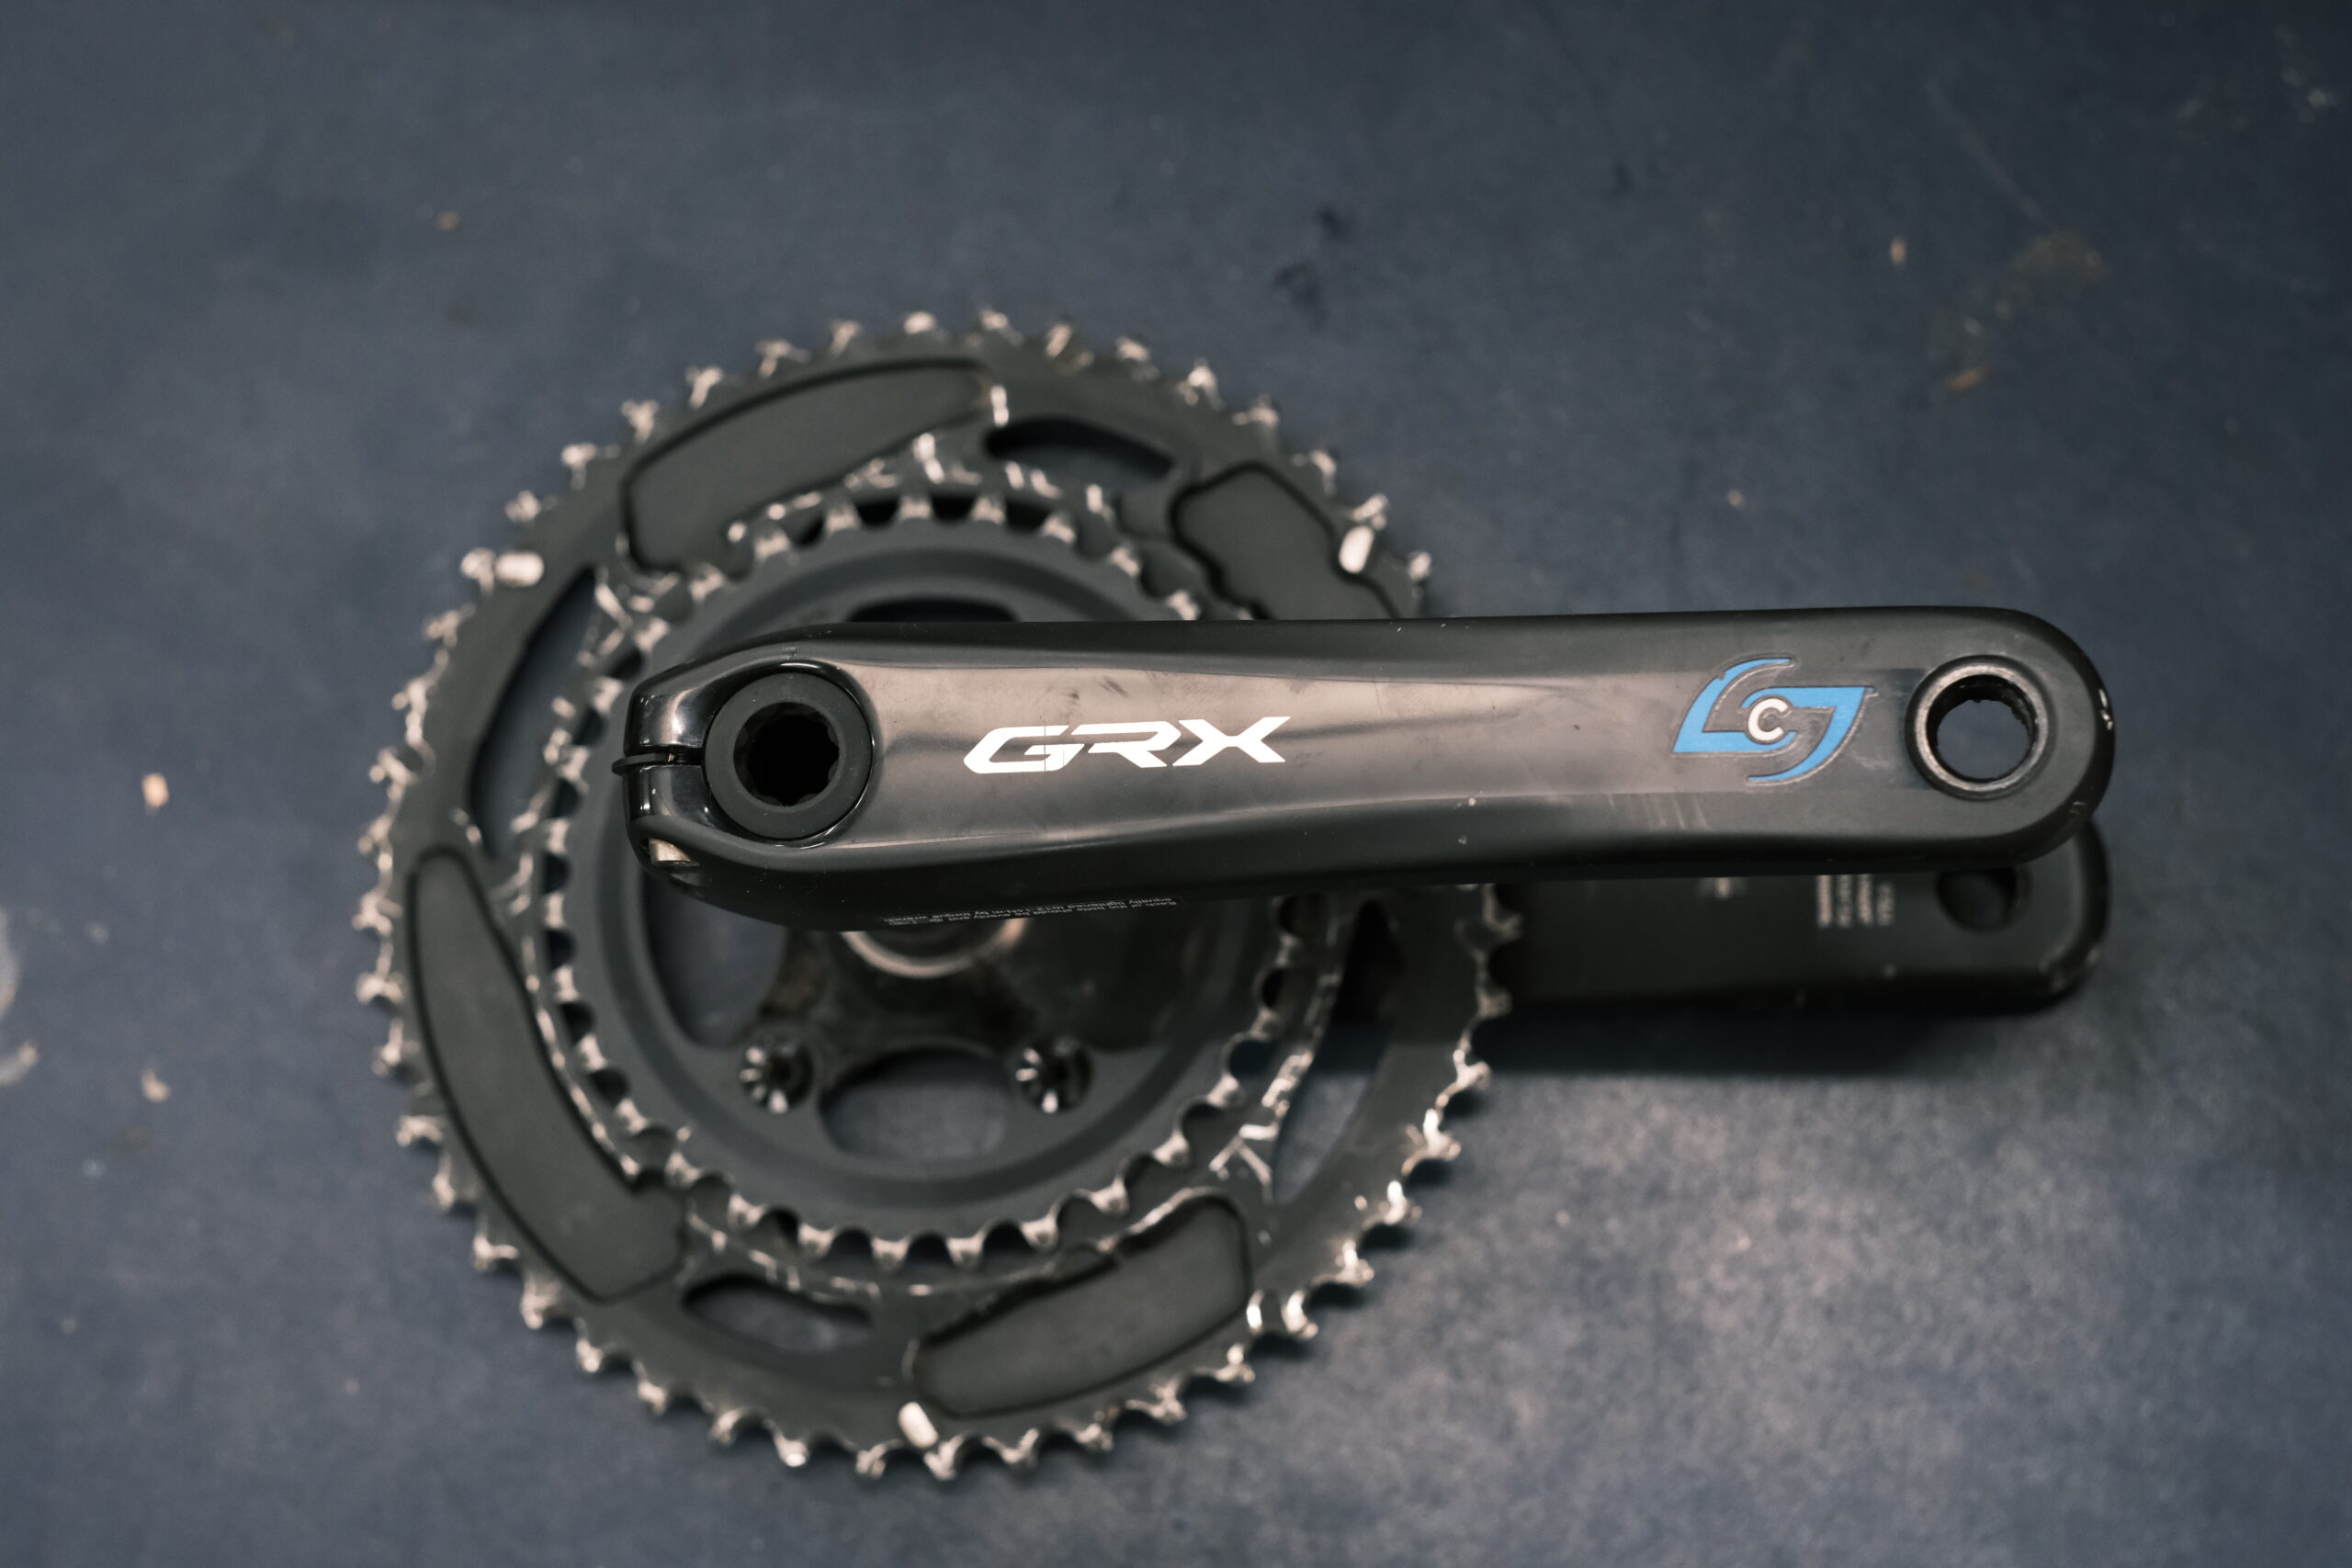 Shimano GRX FC-RX810-2 Crankset with Stages left side power meter, 48/31